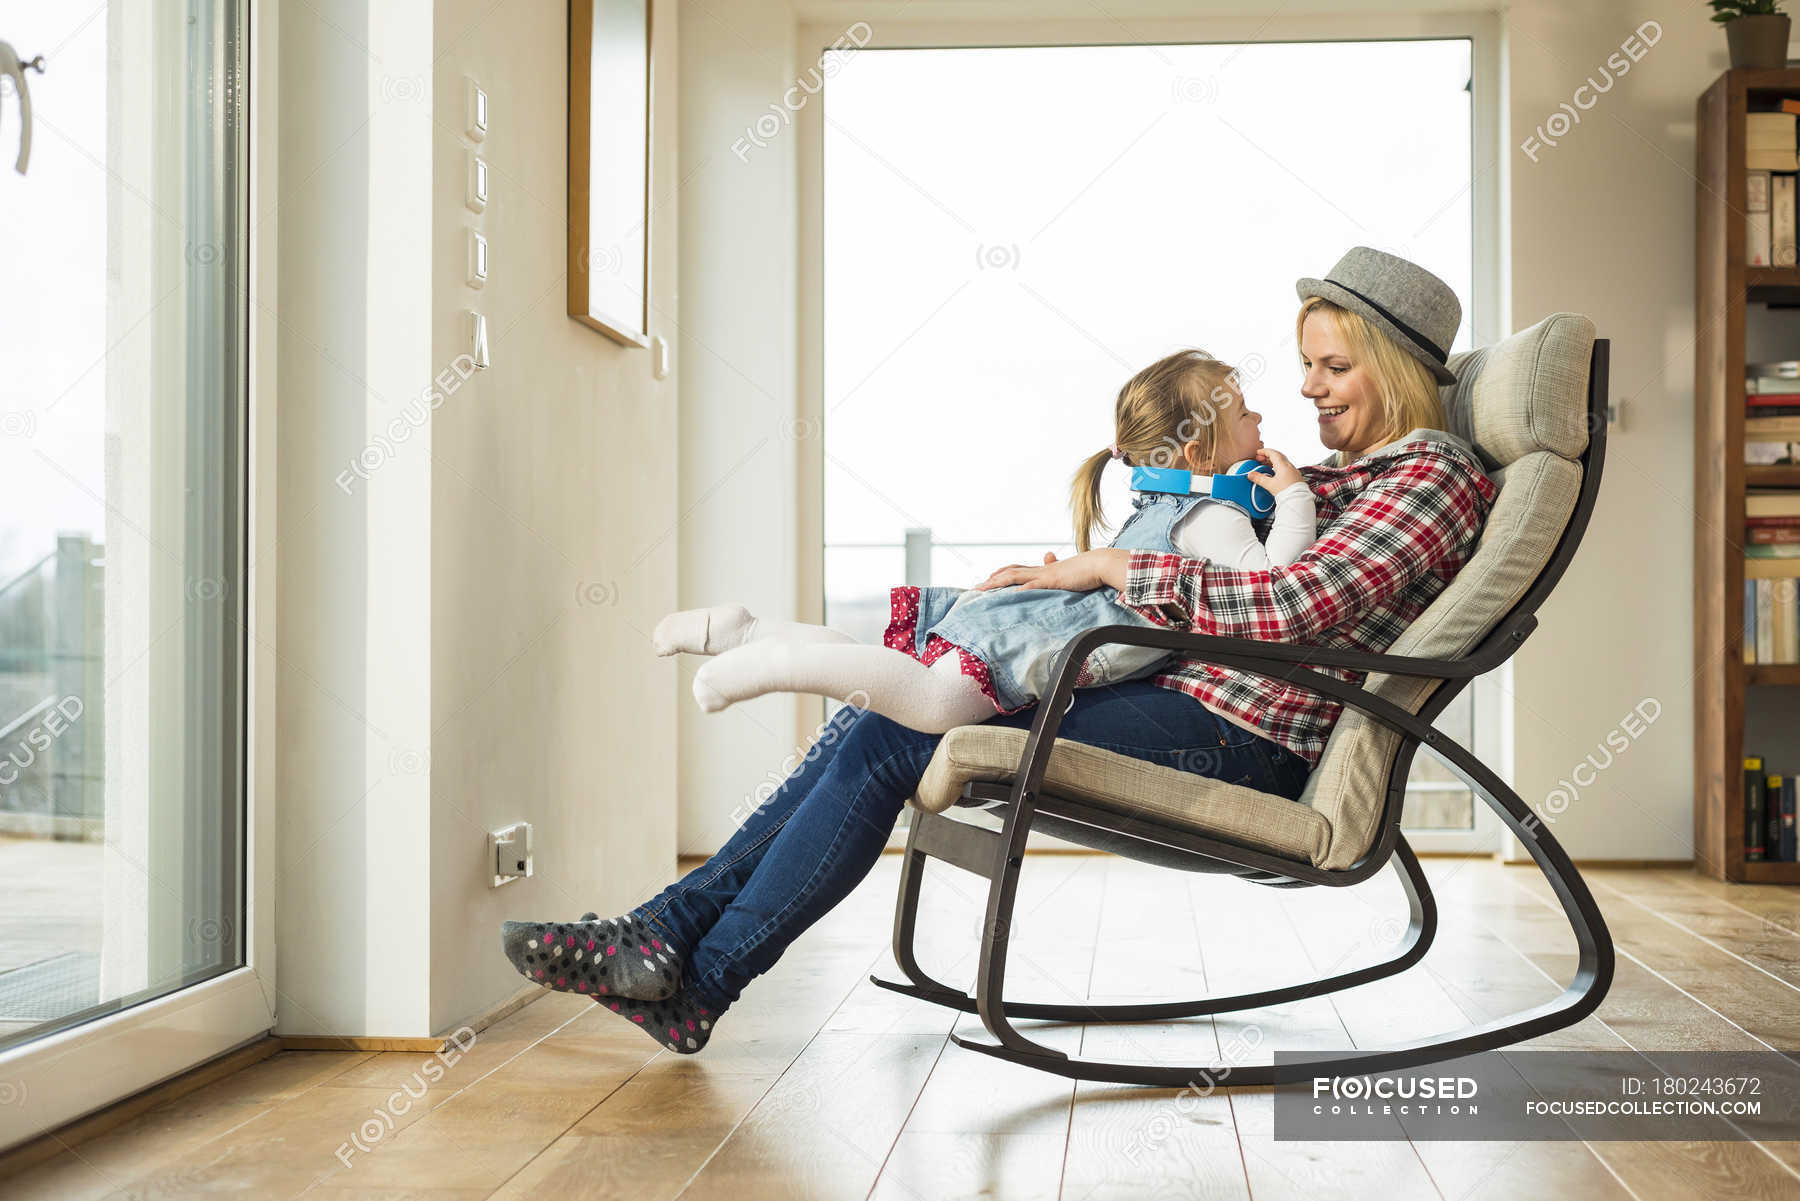 mother rocking chair